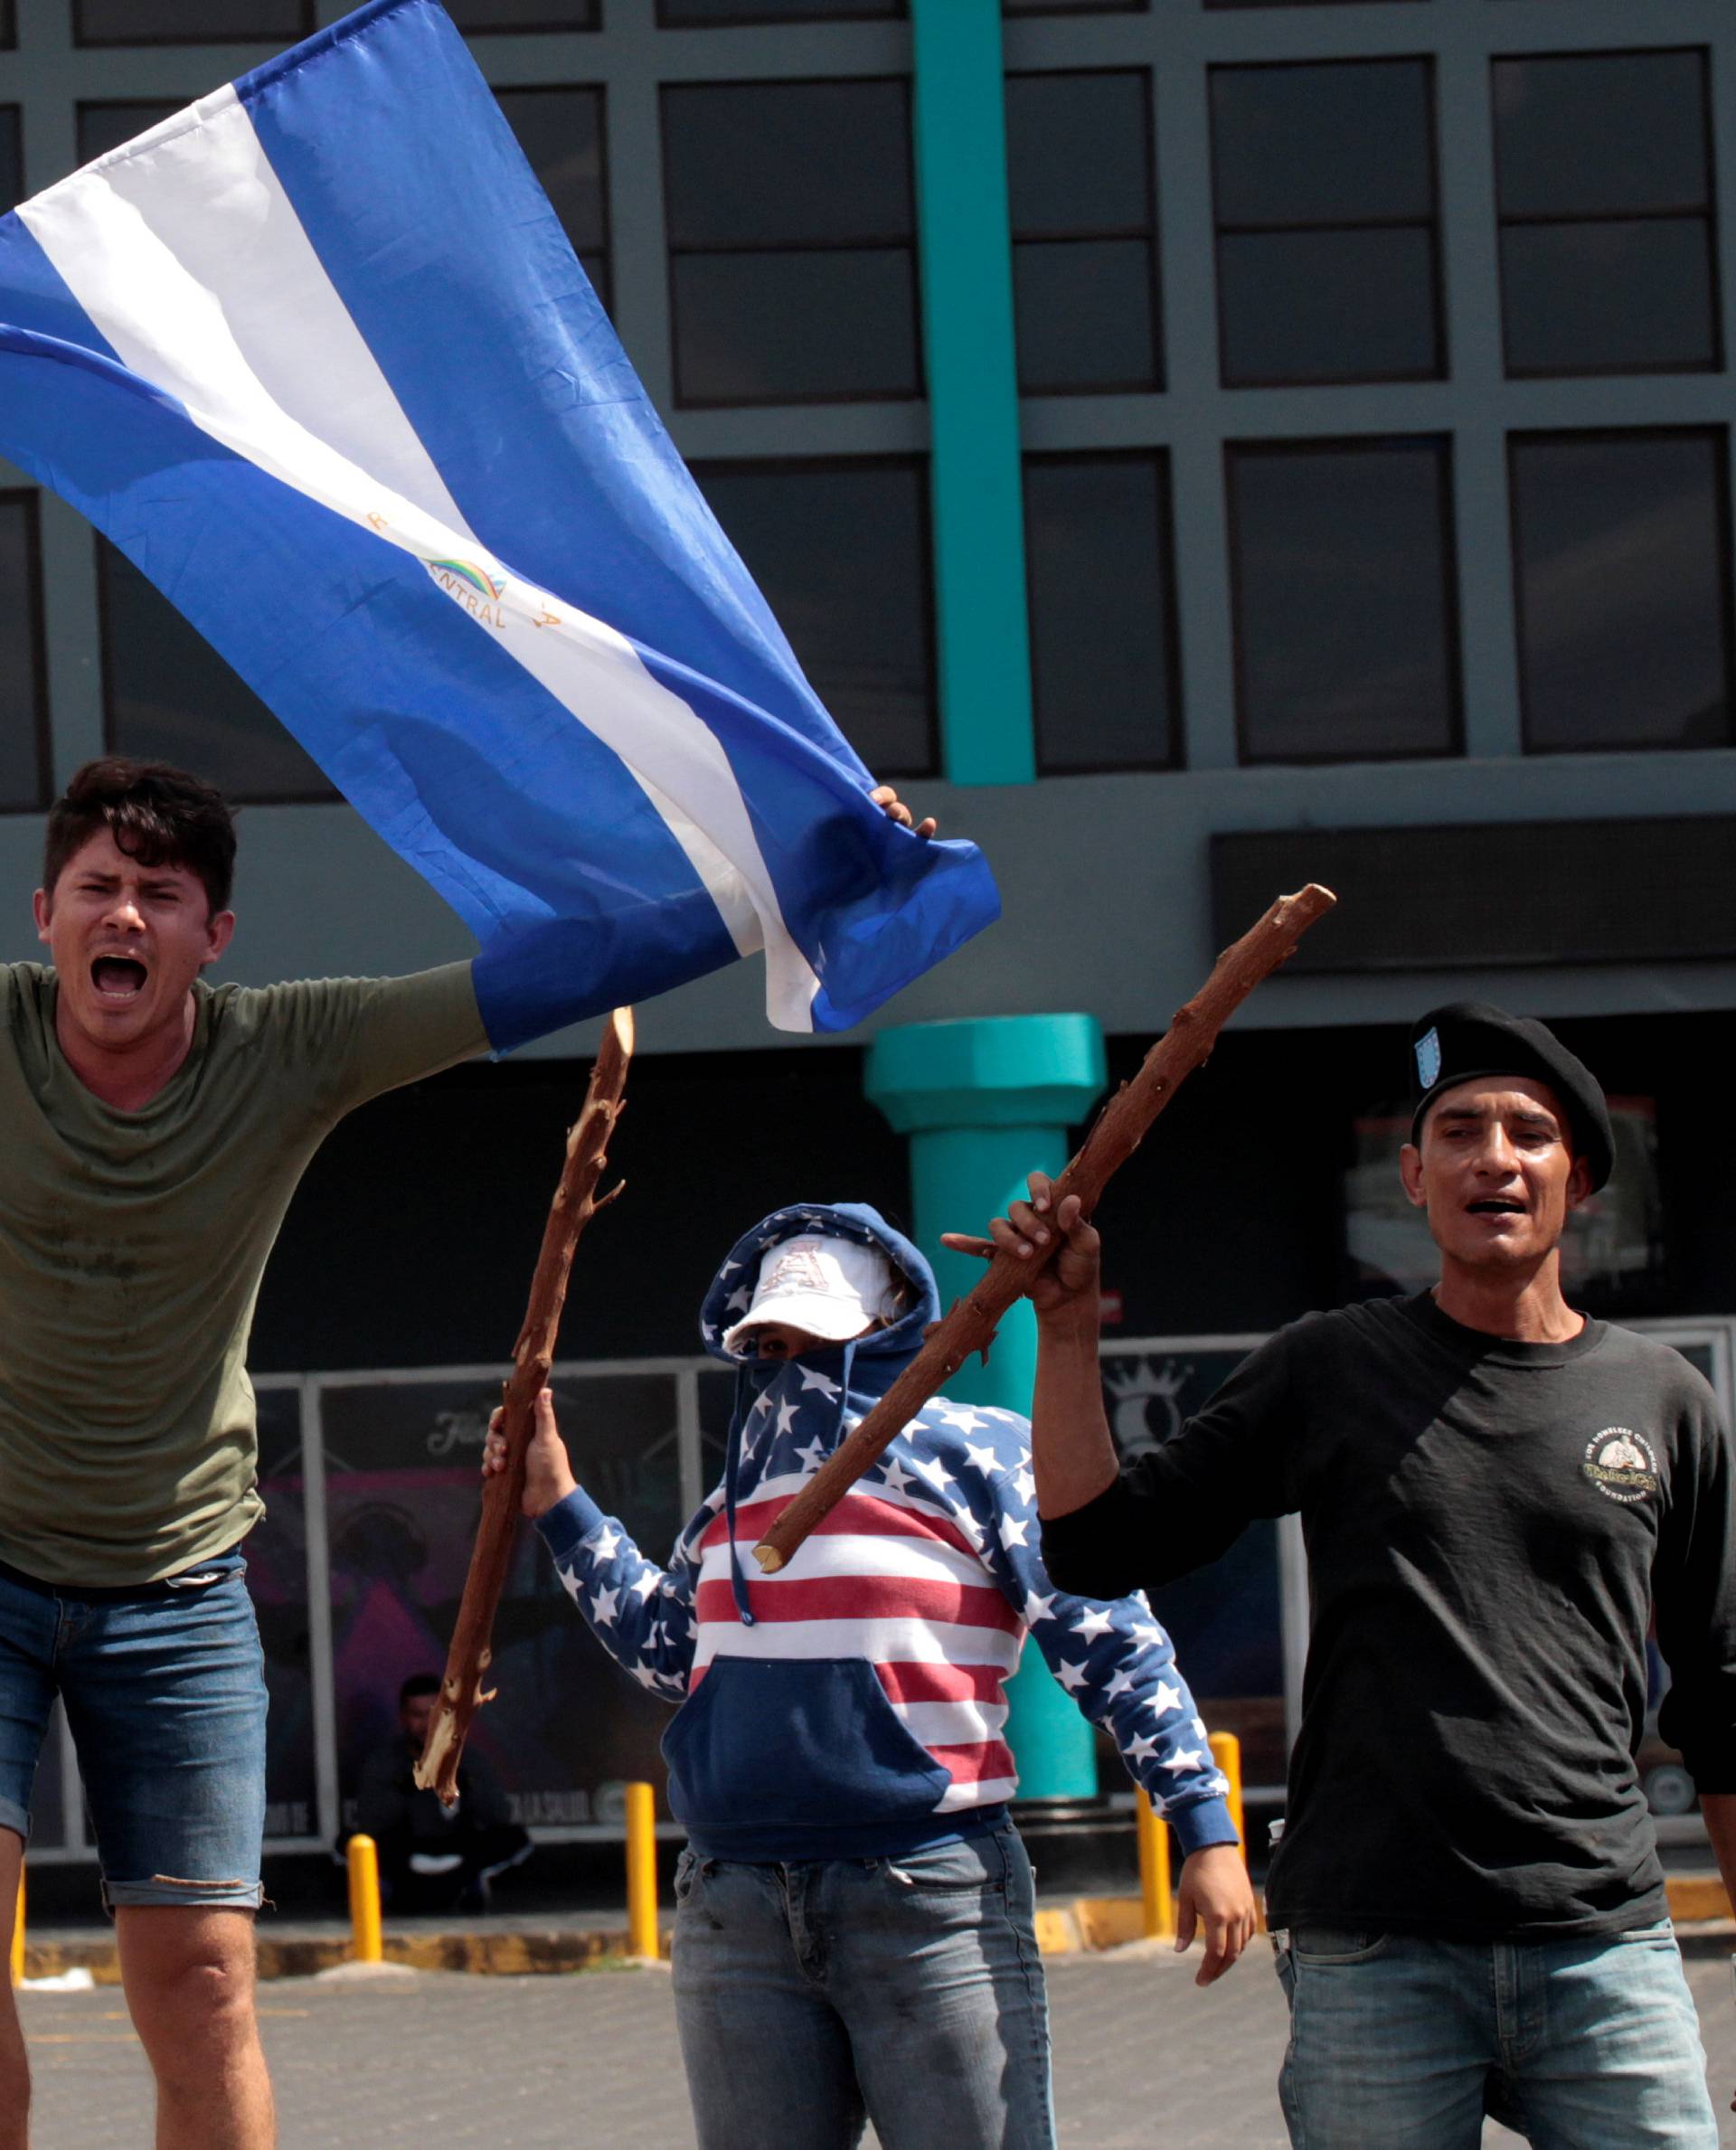 A demonstrator takes part in a protest in Managua